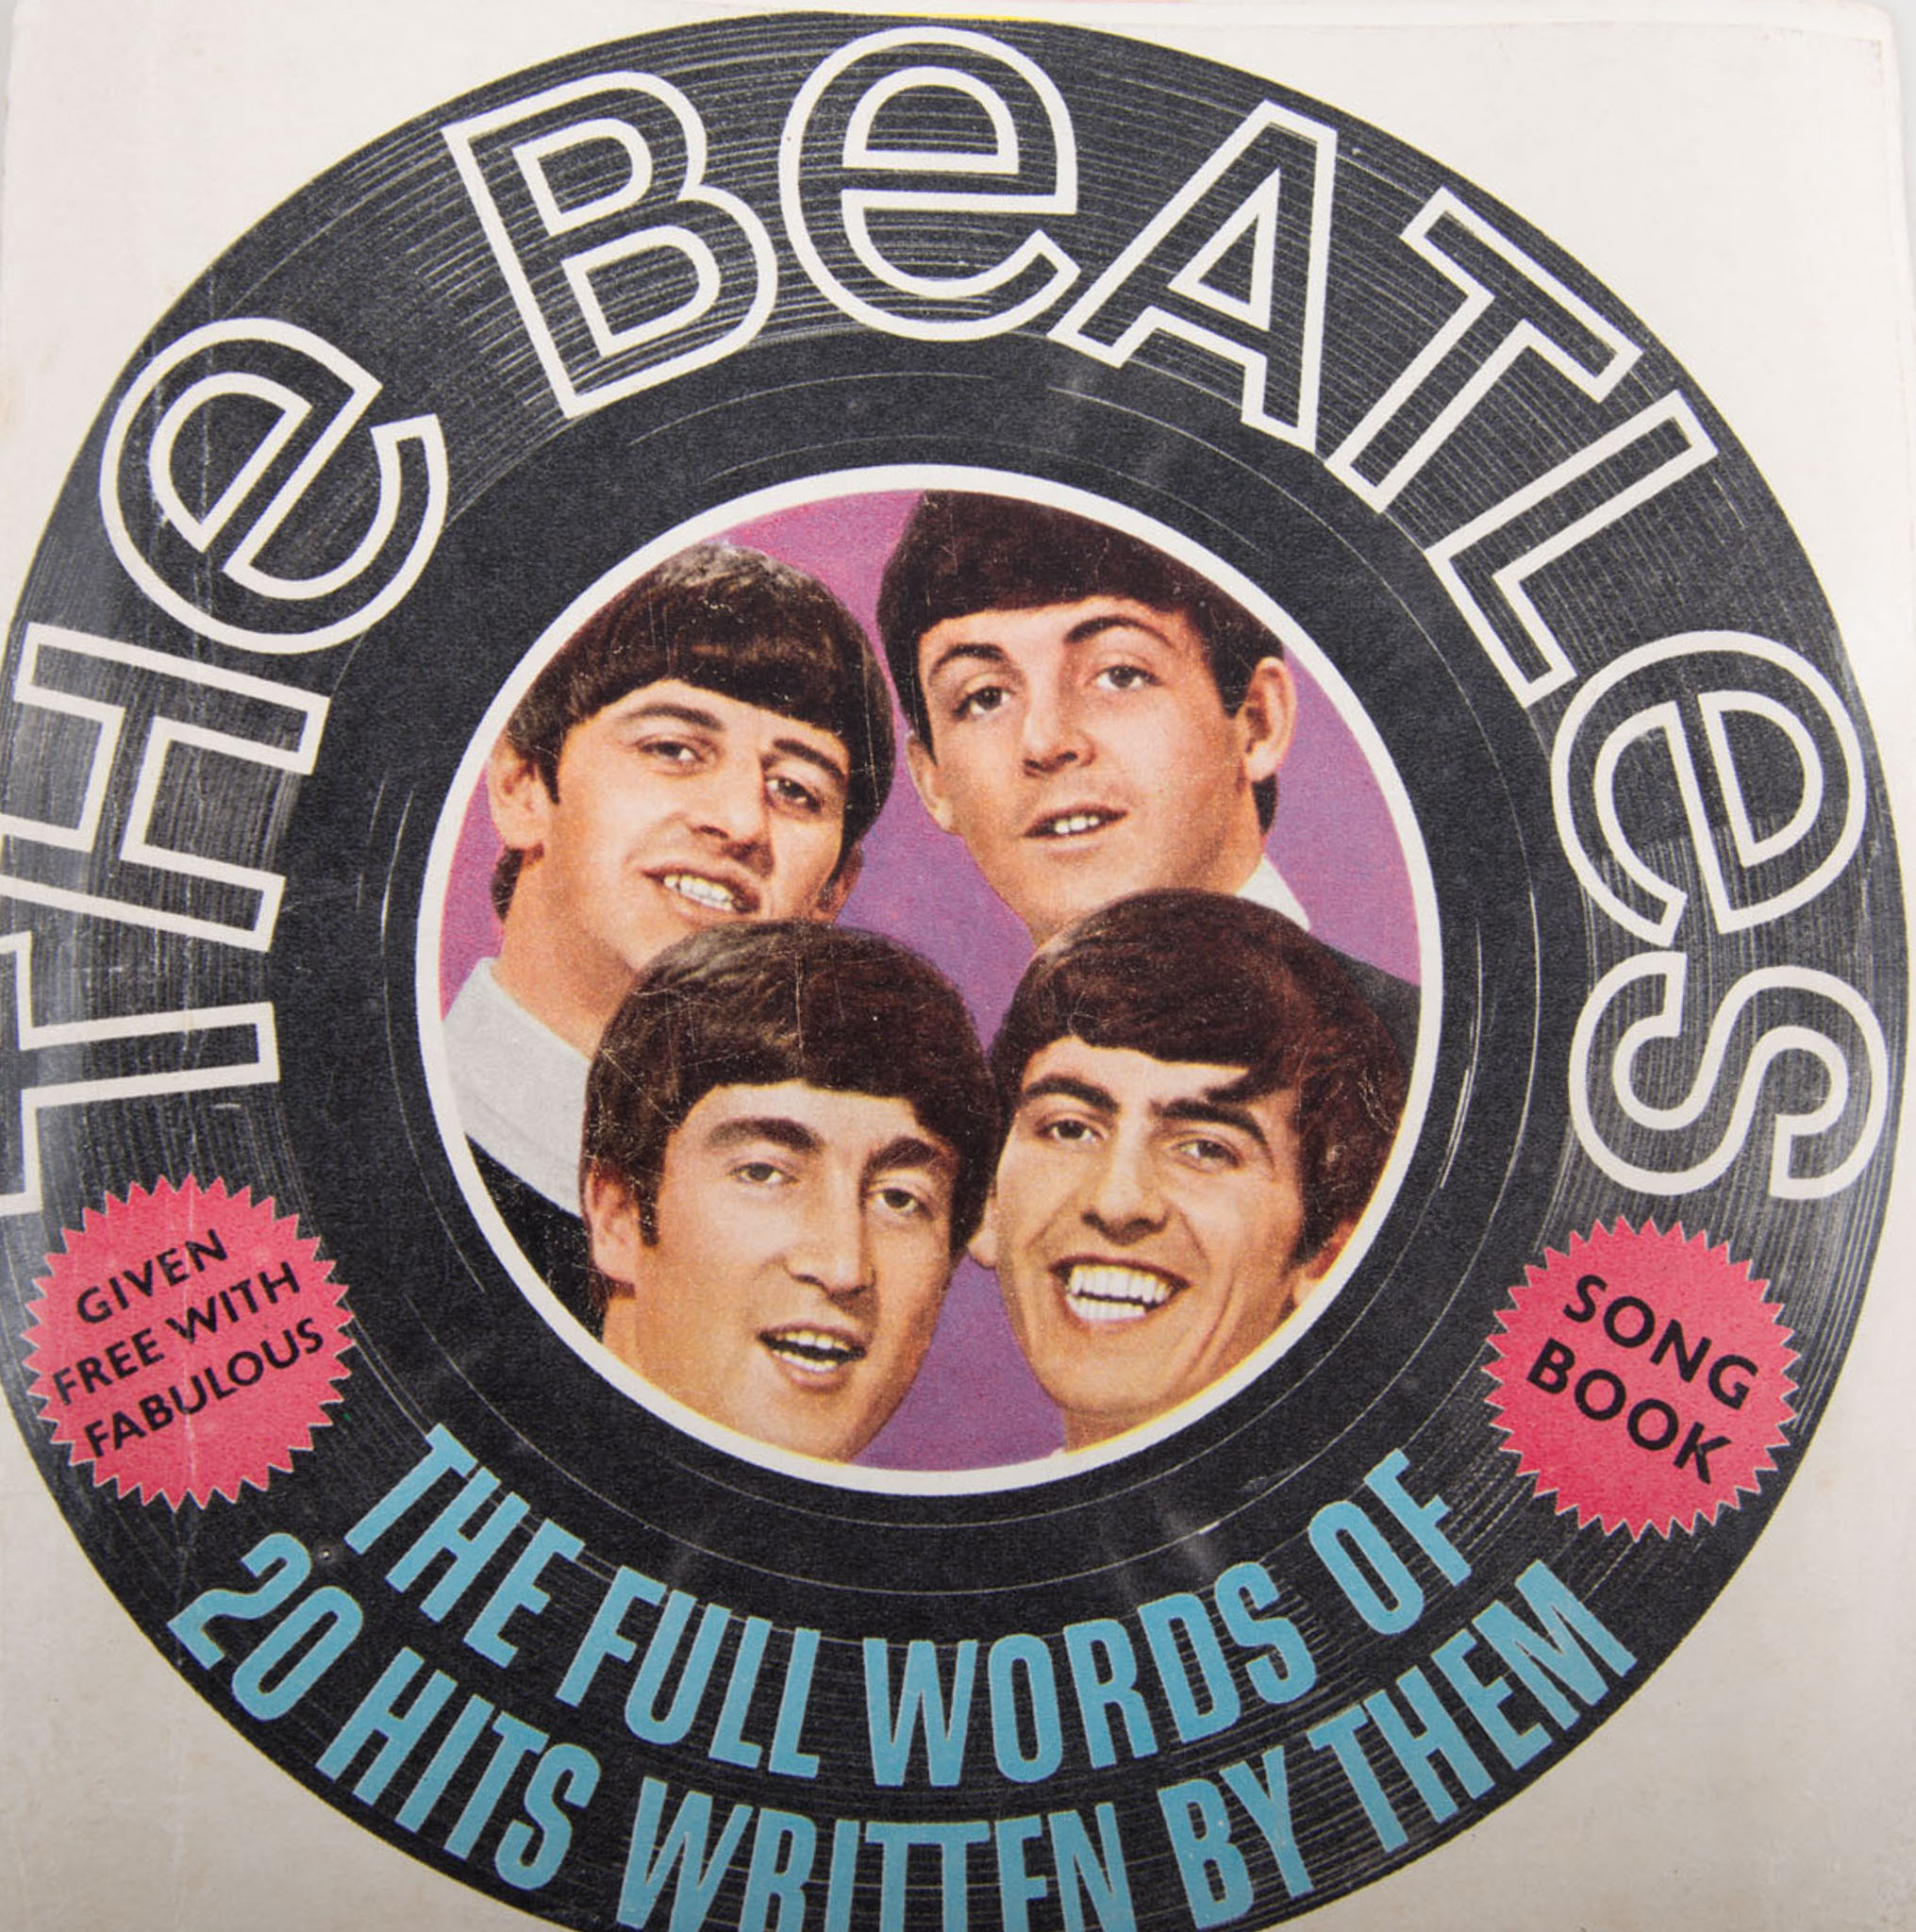 The Beatles Book, volumes 3, 15-58, 61 and words sheet plus Fan Club booklet, (quantity).